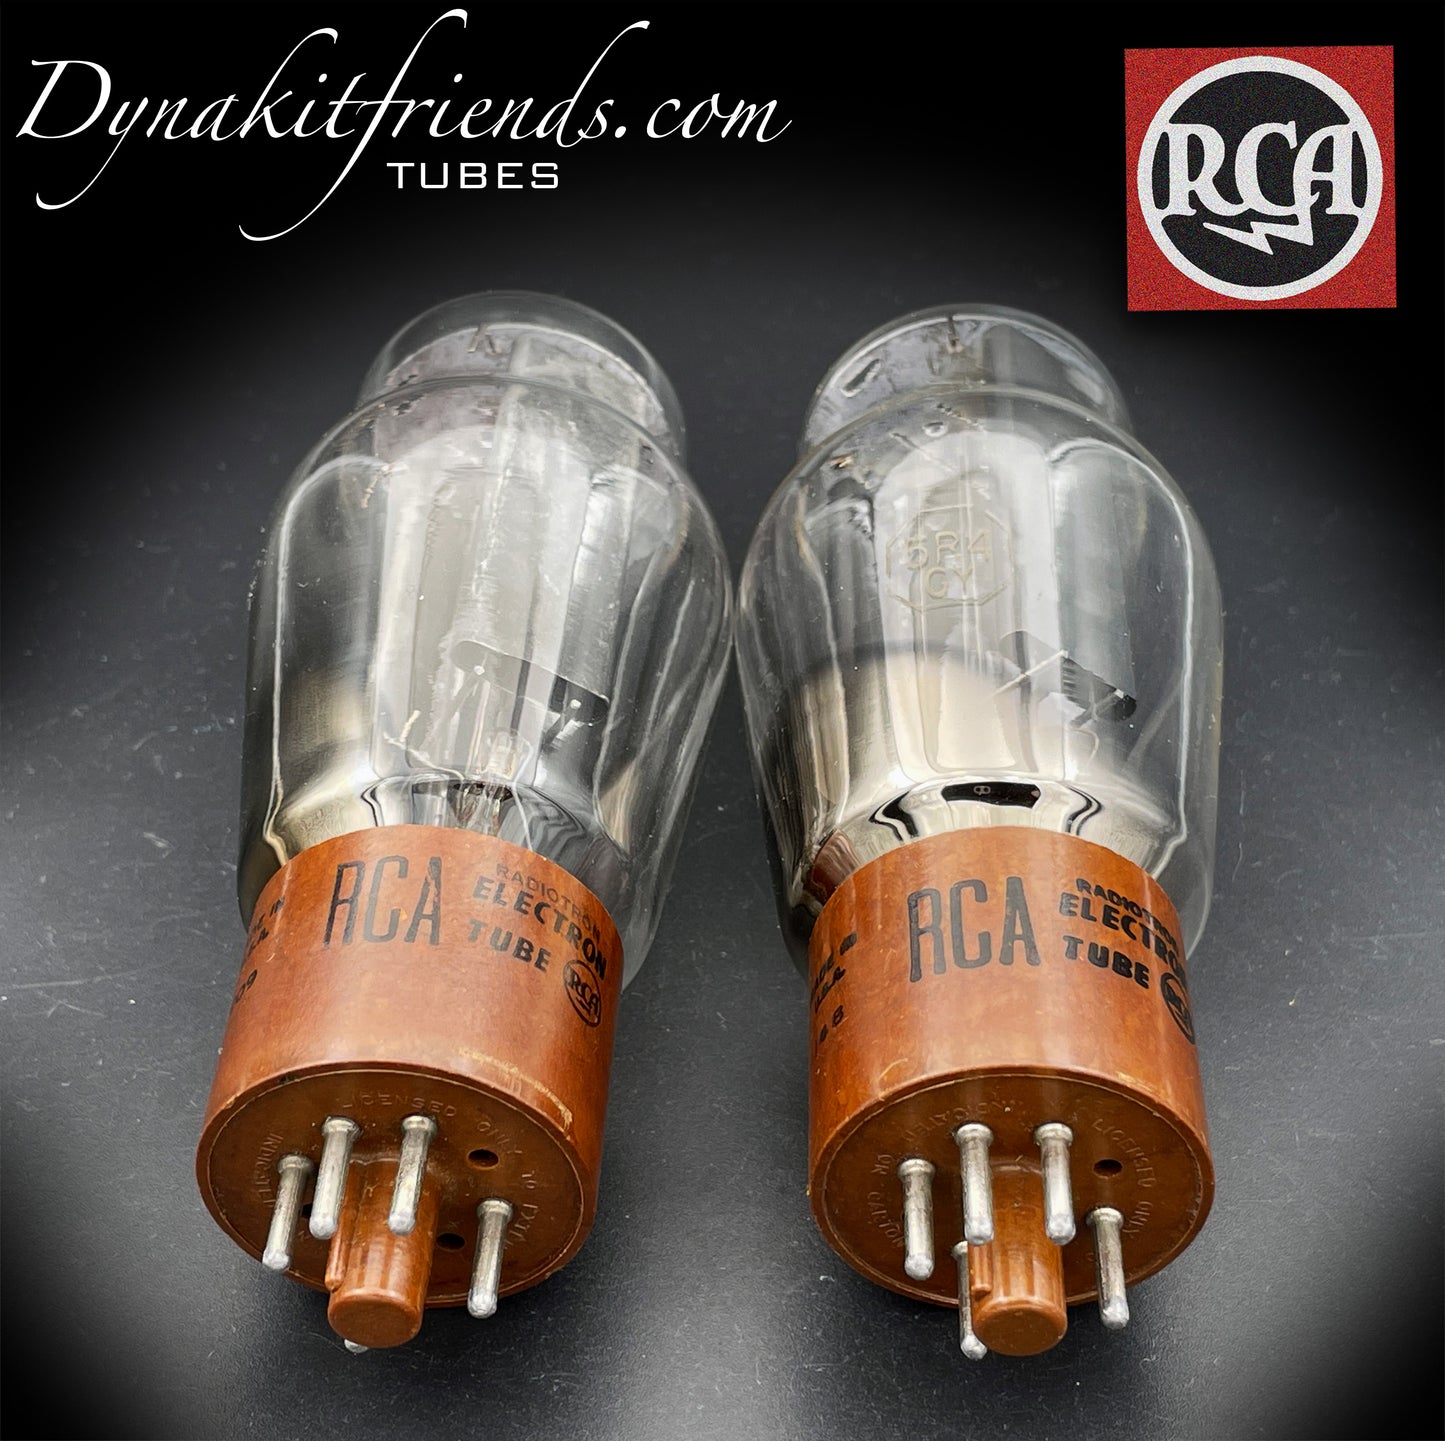 5R4GY ( CV717 ) RCA Black Plates Square Bottom Getter Matched Tubes Rectifiers Made in USA '50s